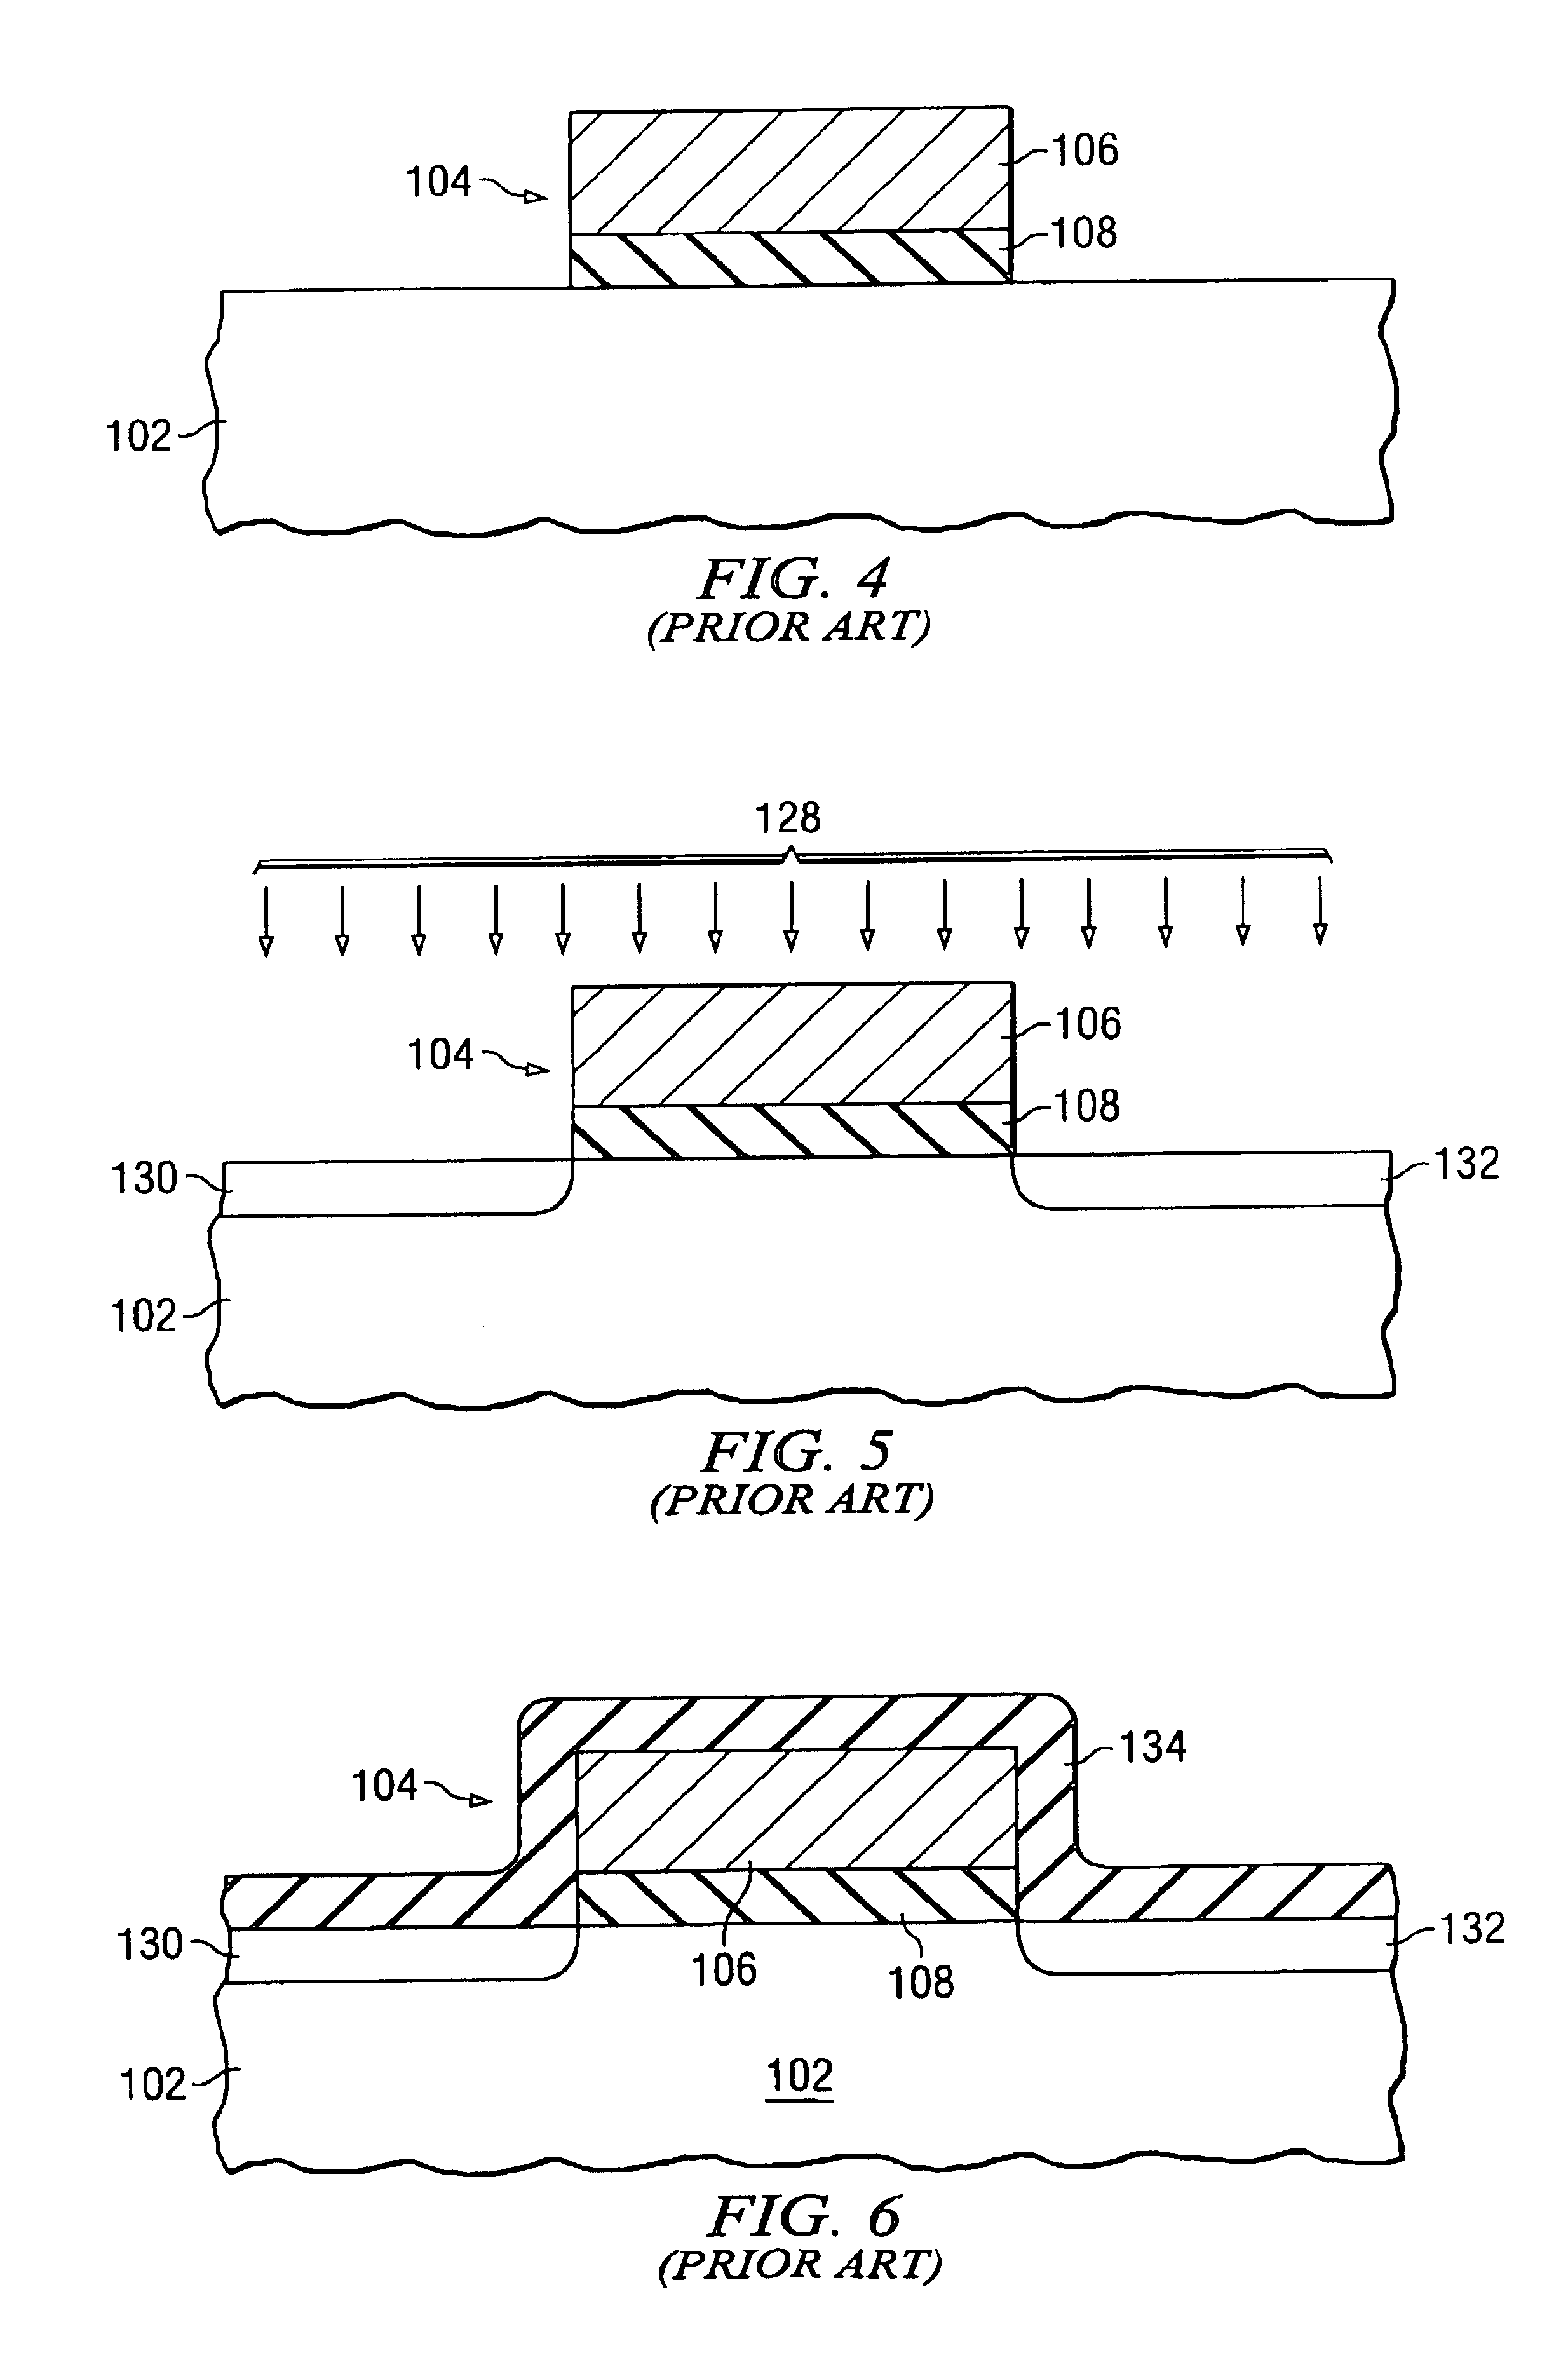 Process method of source drain spacer engineering to improve transistor capacitance